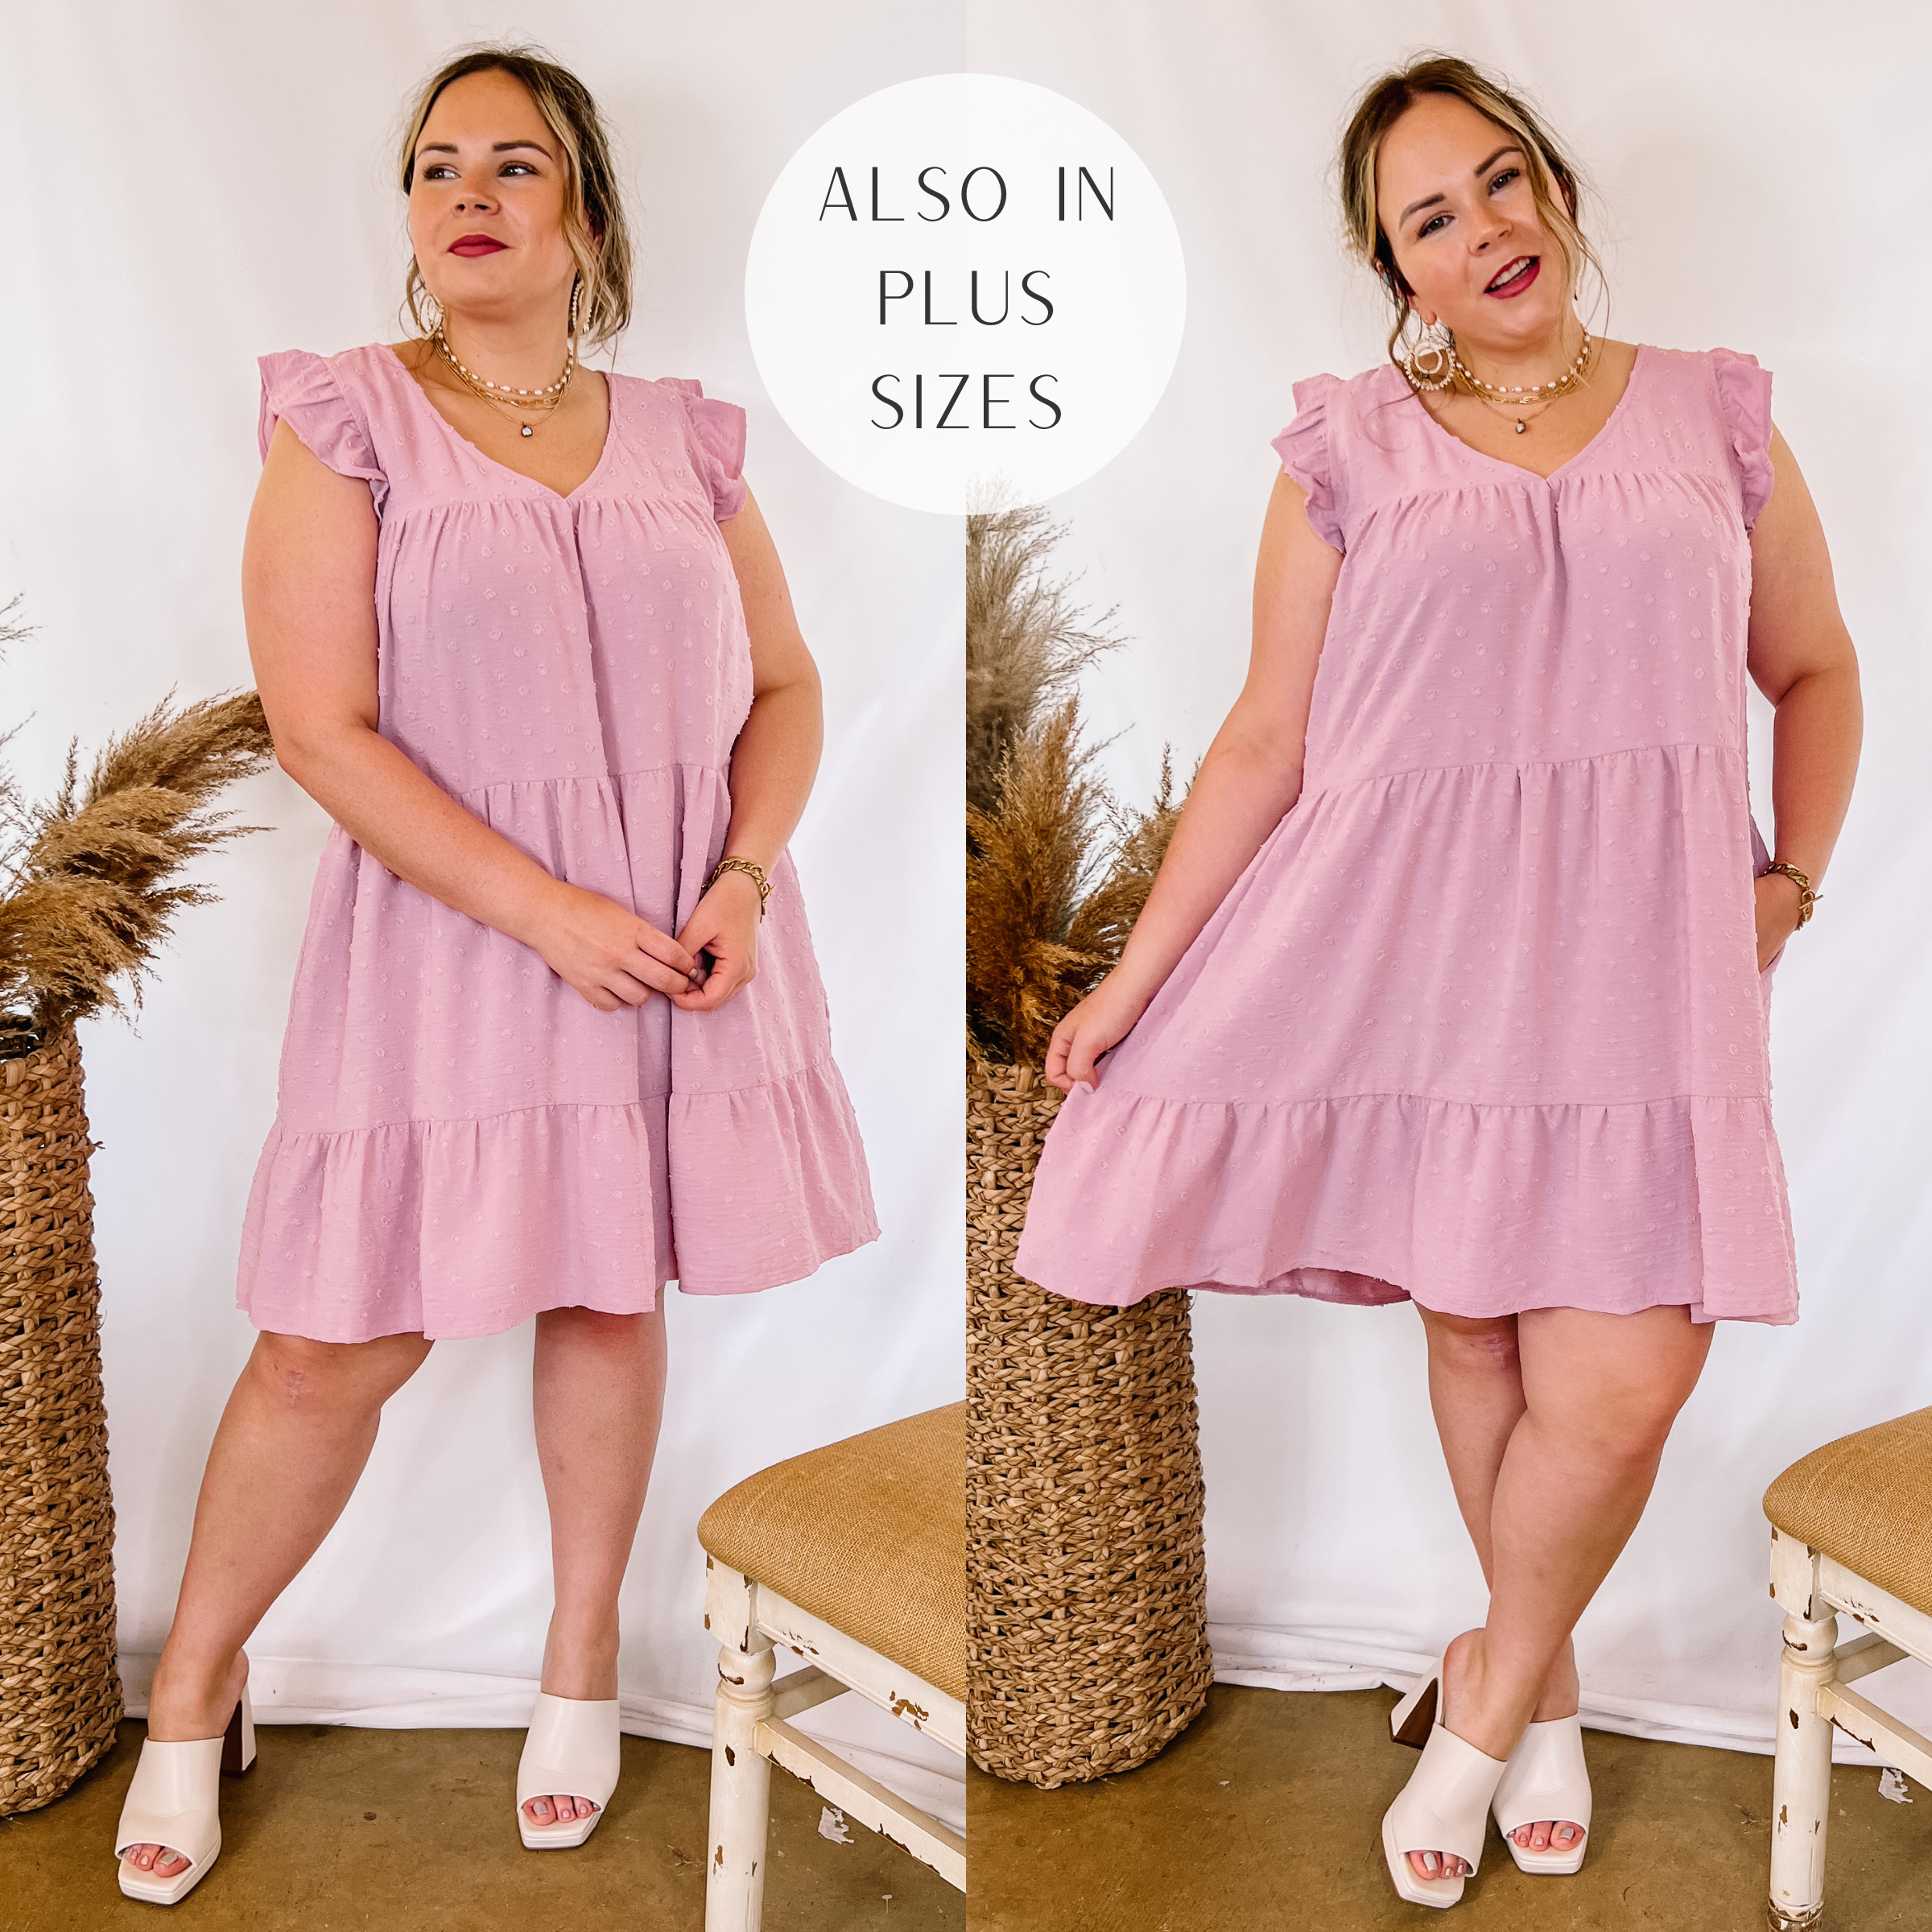 Model is wearing a swiss dot ruffle tiered dress with ruffle cap sleeves in mauve pink. Model has it paired with white heels and gold jewelry.